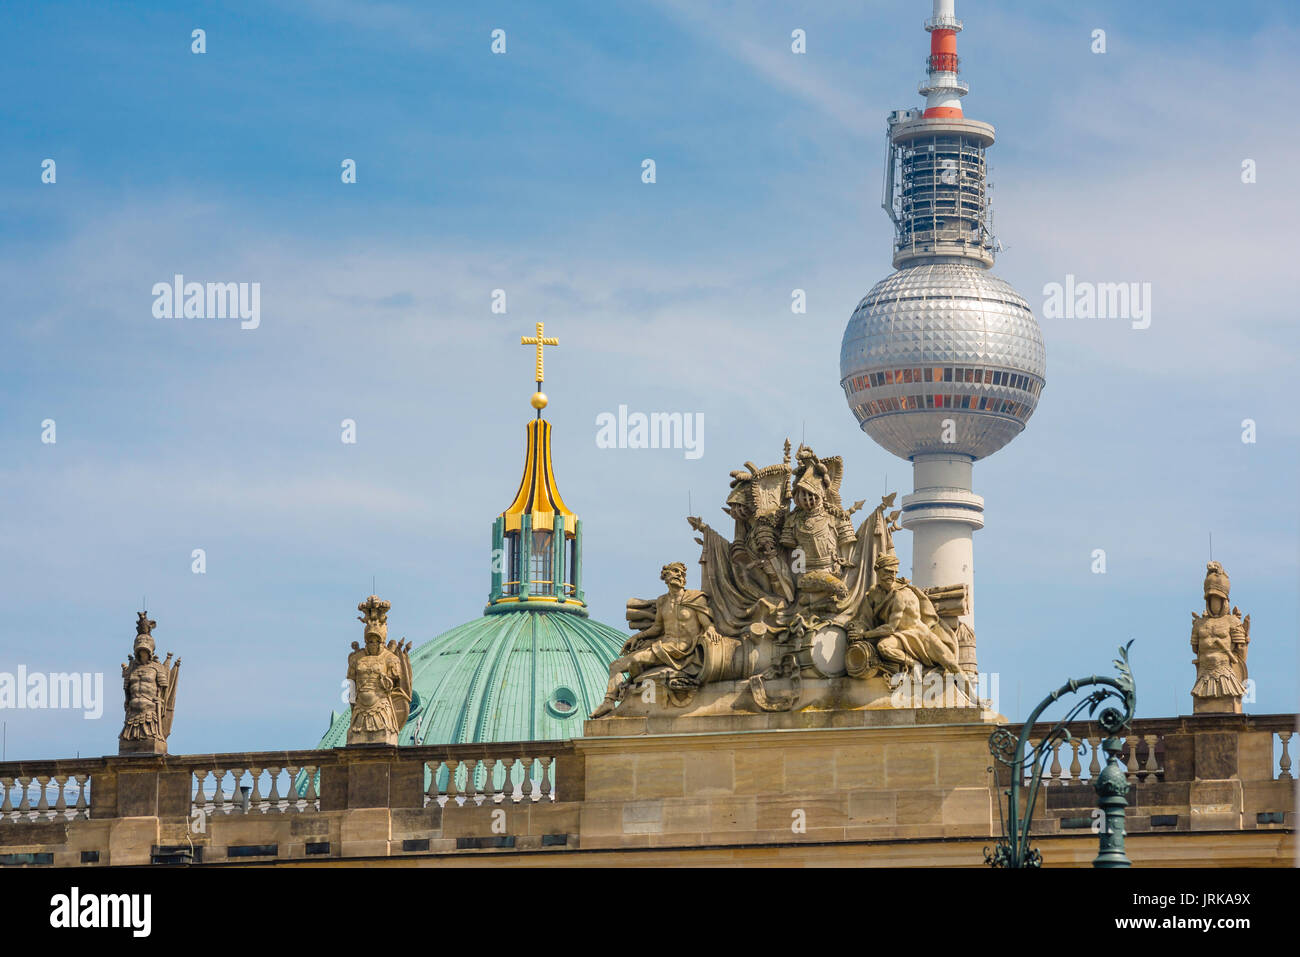 Berlin skyline, view of the contrasting architectural styles of the Zeughaus, the Berliner Dom and the Fernsehturm TV tower, Mitte, Berlin, Germany Stock Photo